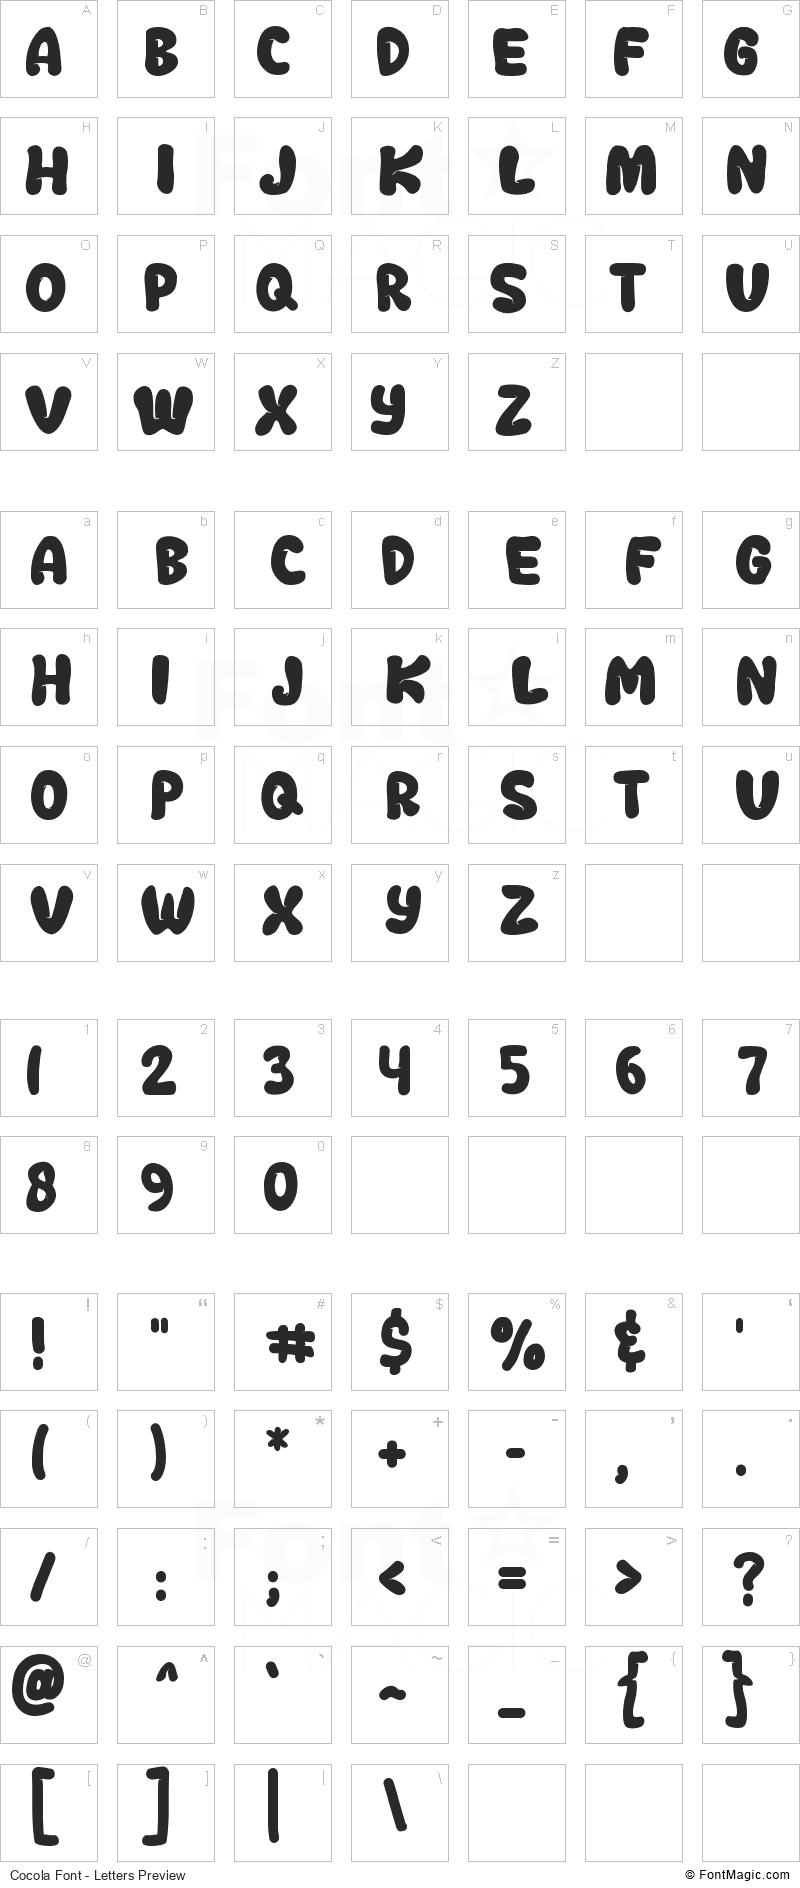 Cocola Font - All Latters Preview Chart